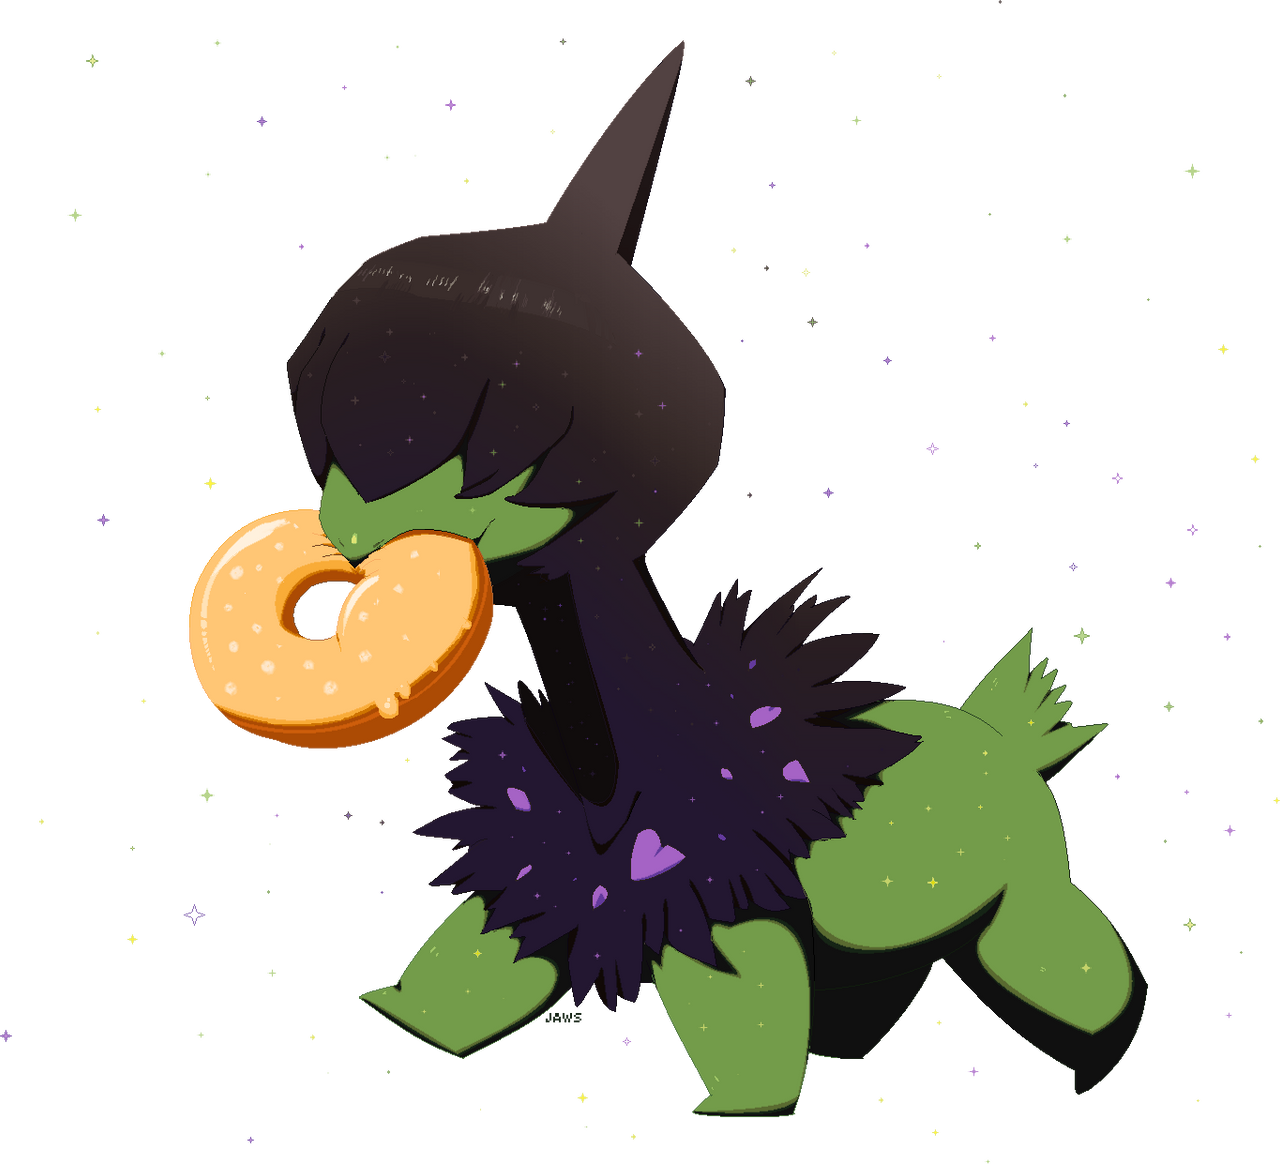 Shiny Farfetch'd by Willow-Pendragon on DeviantArt